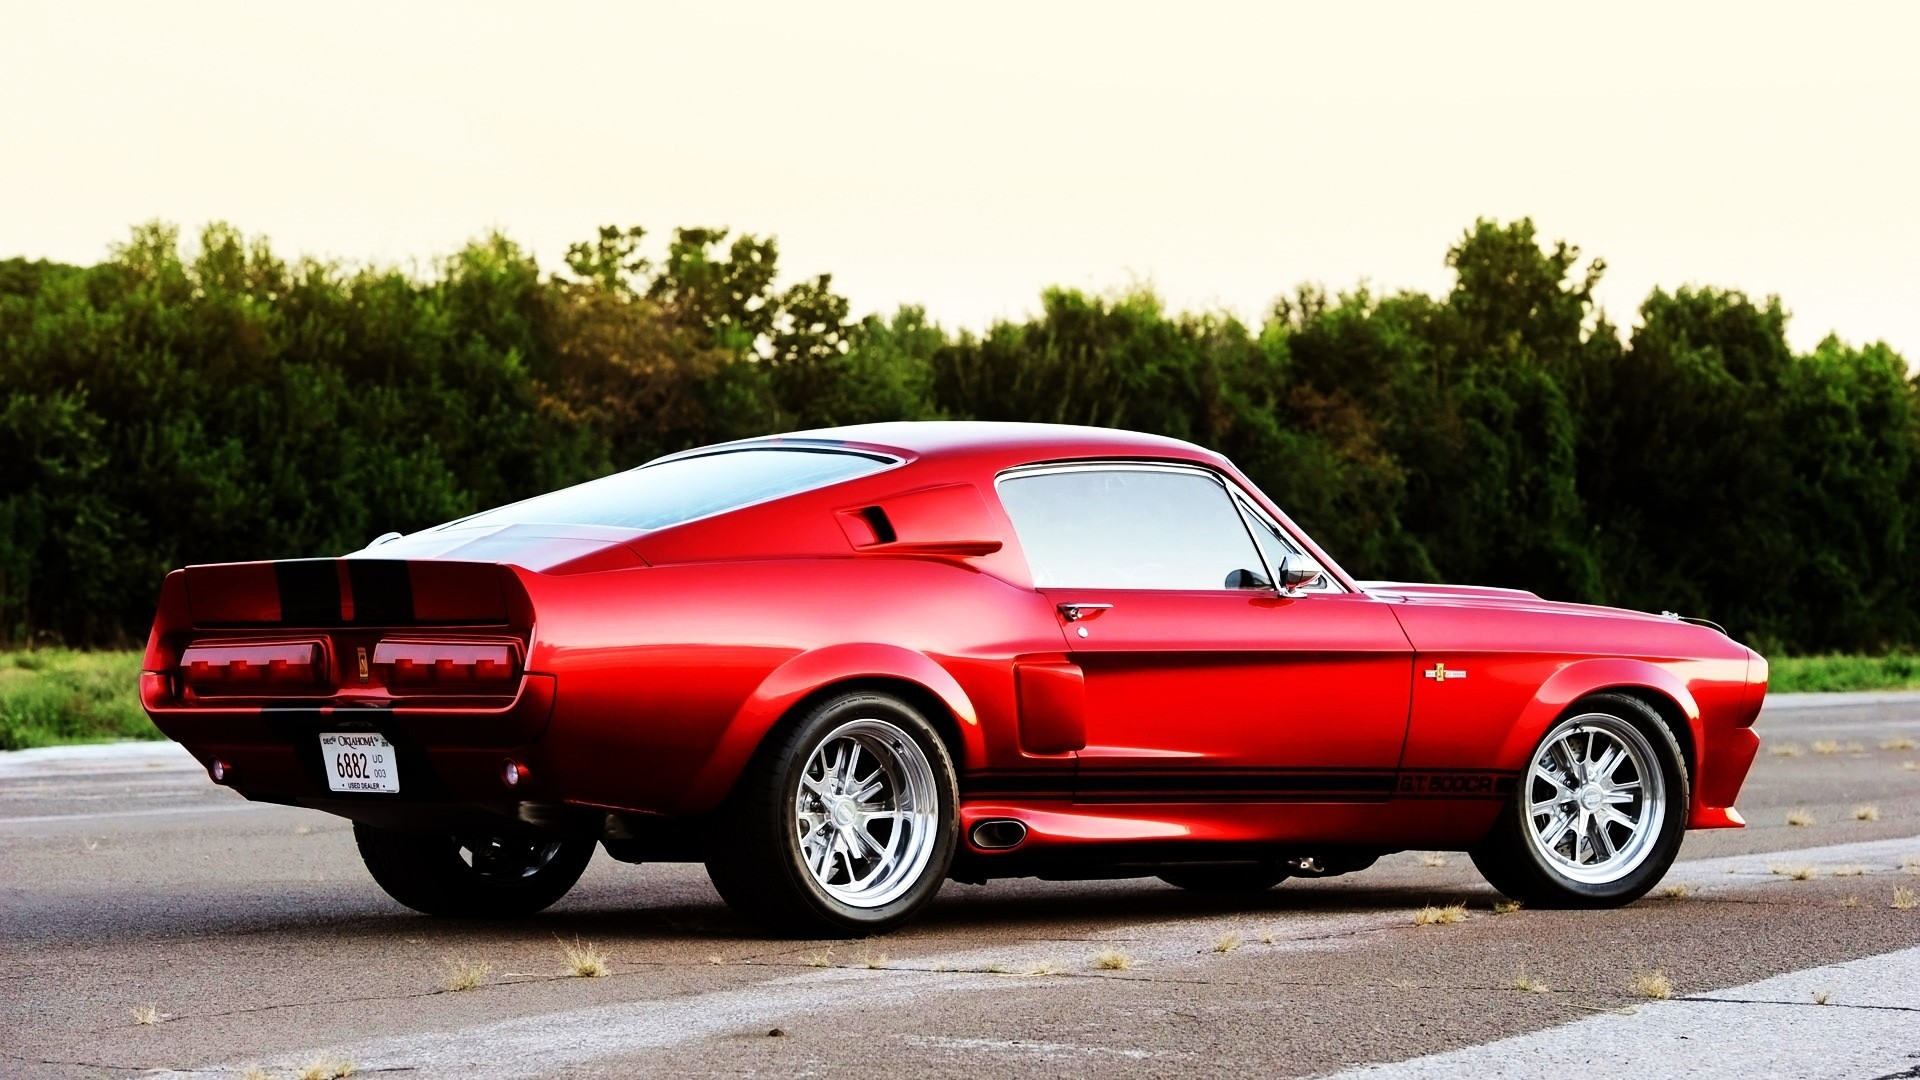 1920x1080 Muscle car wallpapers for laptop